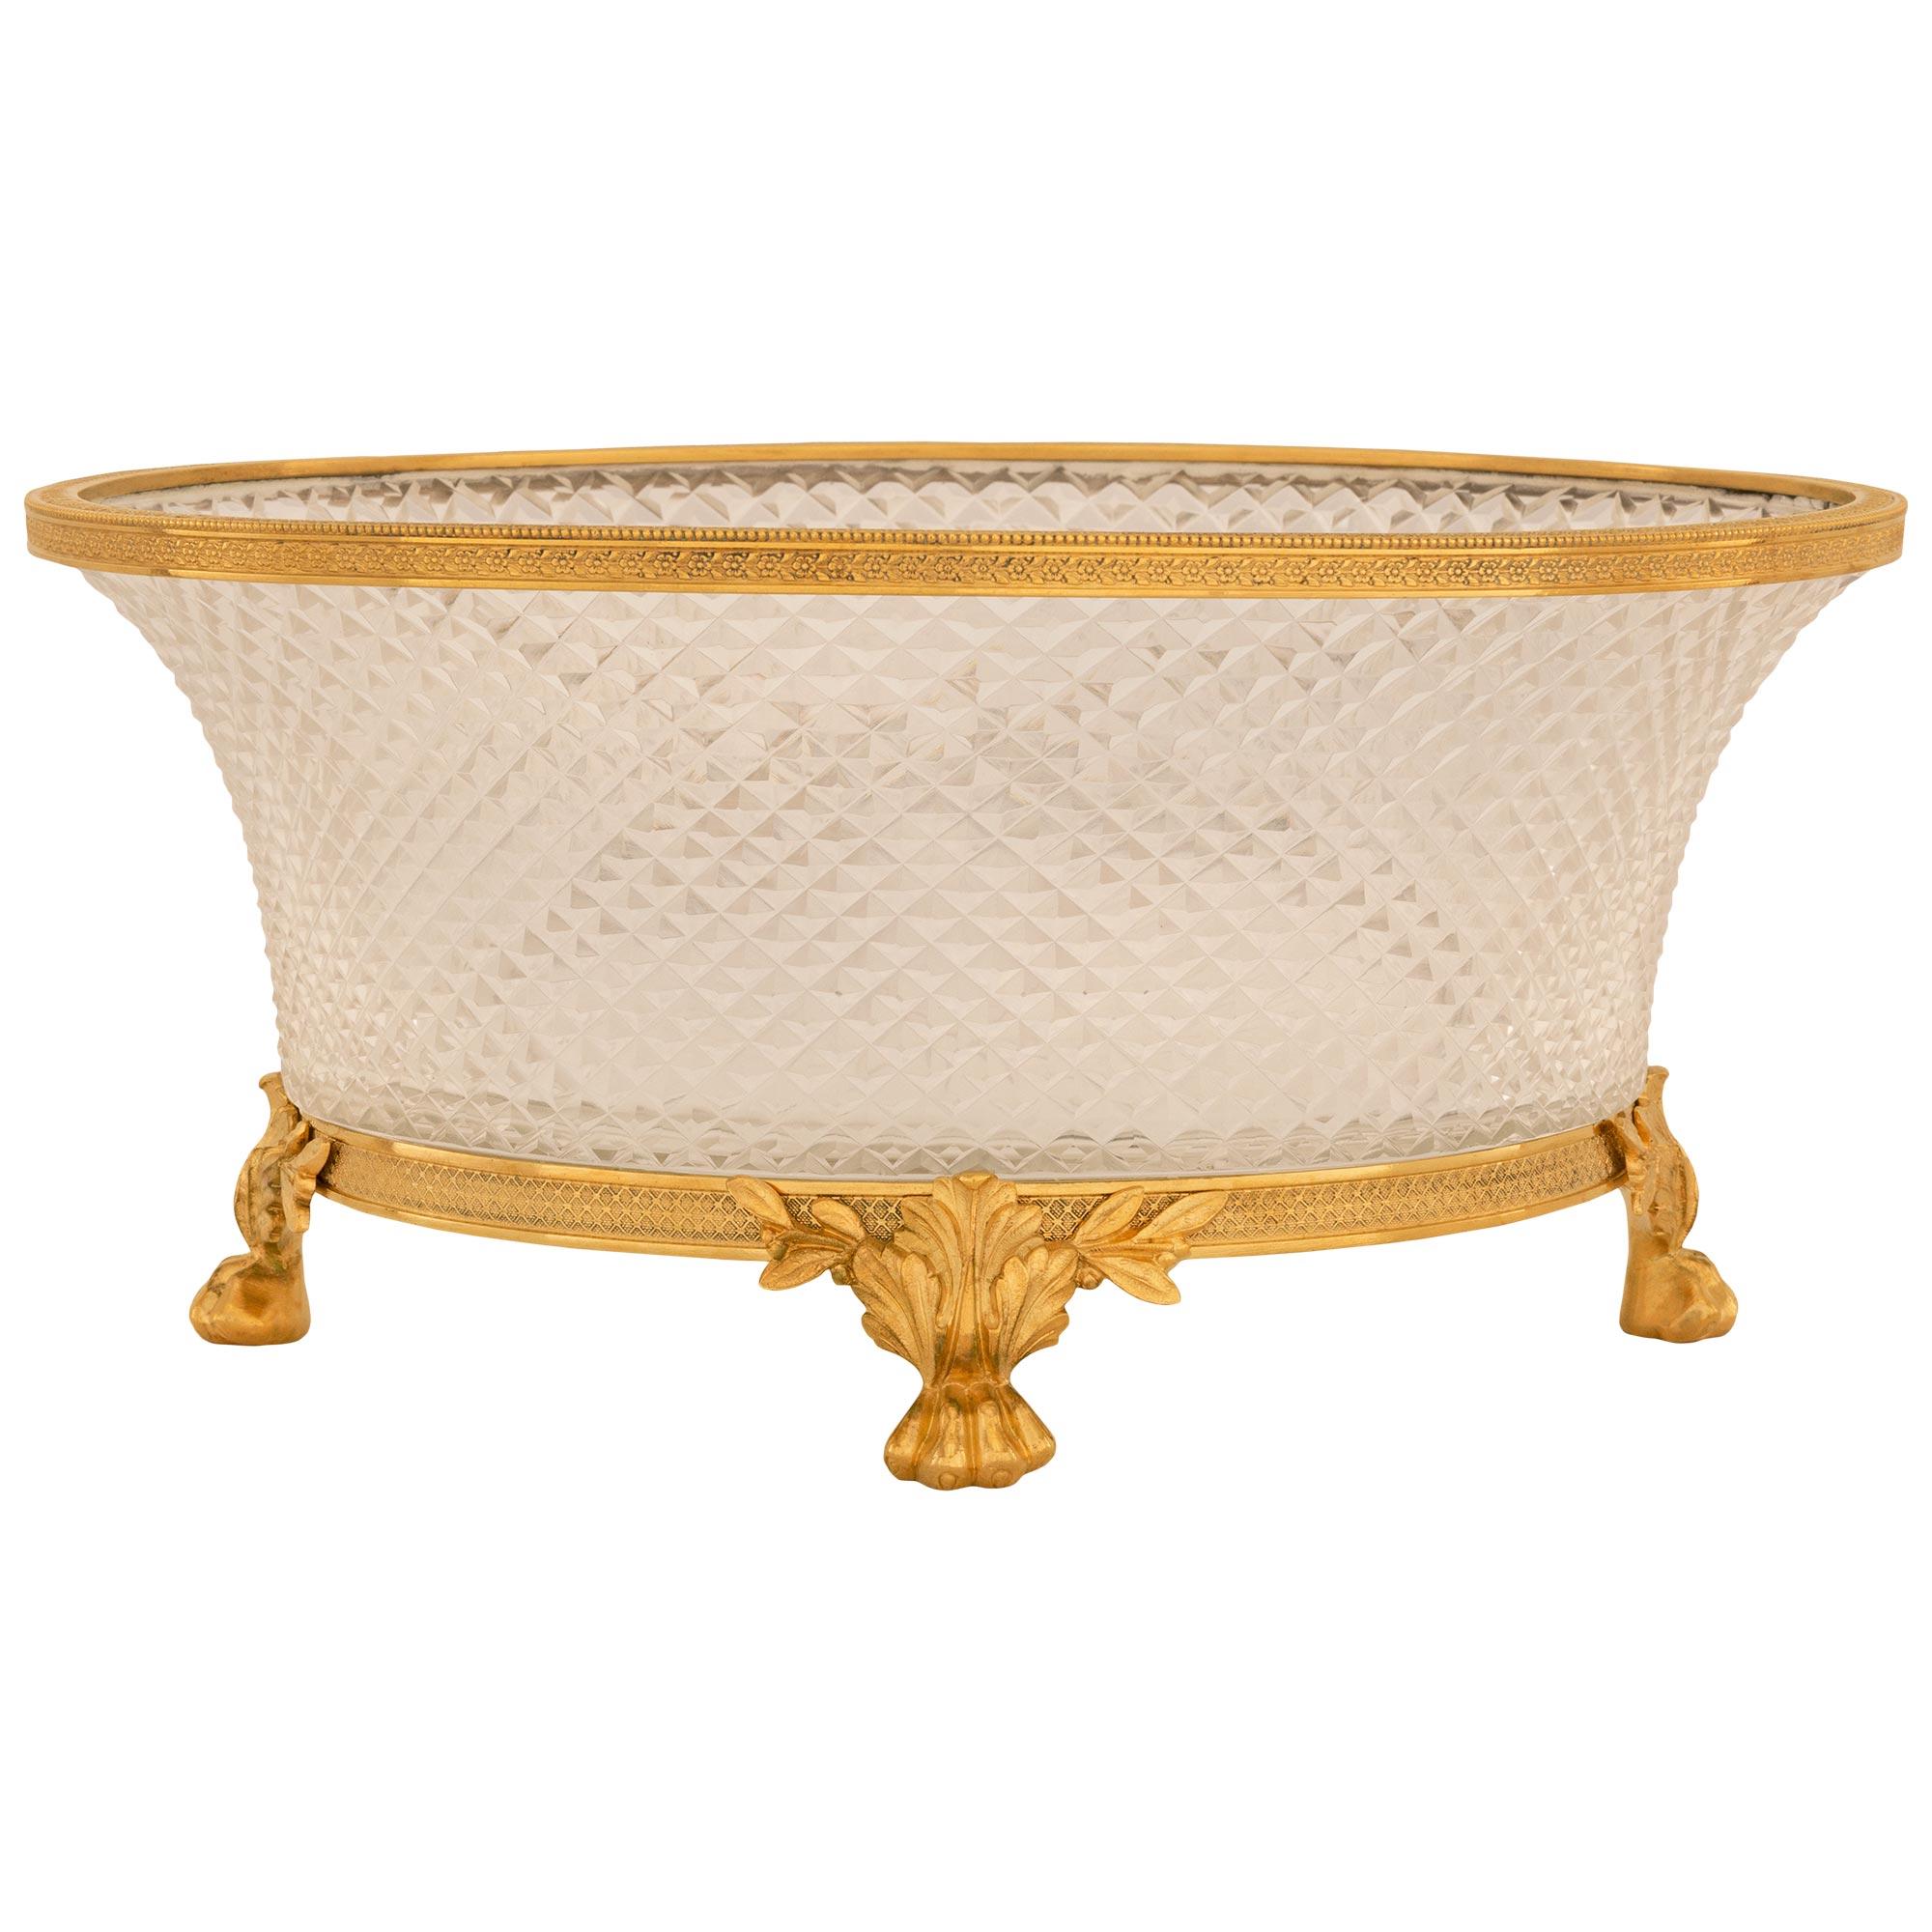 Neoclassical French 19th Century Belle Époque Period Baccarat Crystal and Ormolu Centerpiece